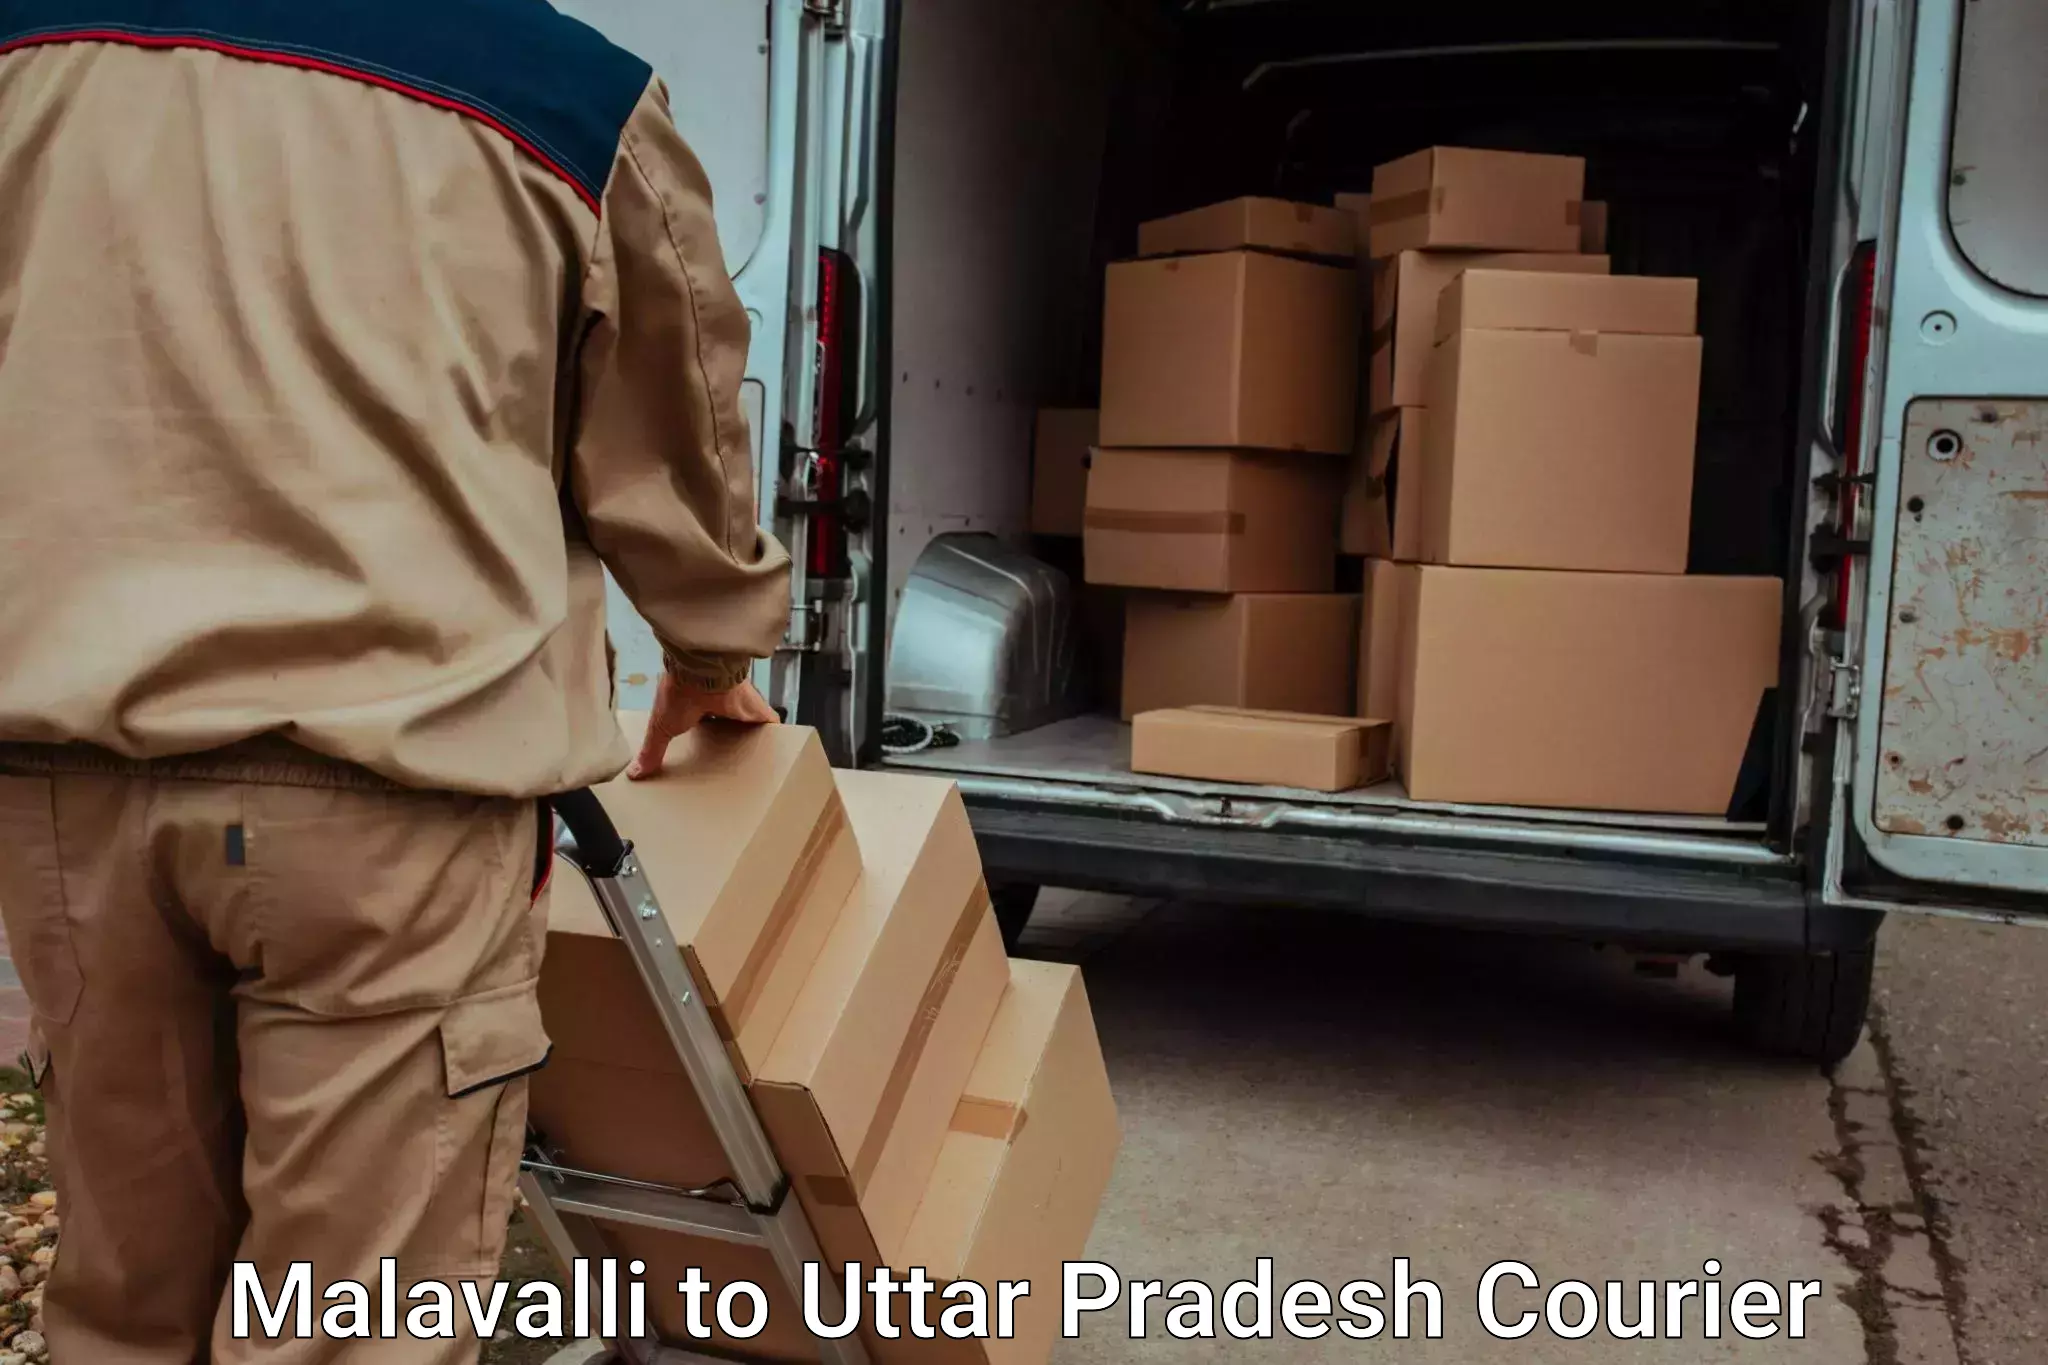 Furniture delivery service Malavalli to Dhaurahara